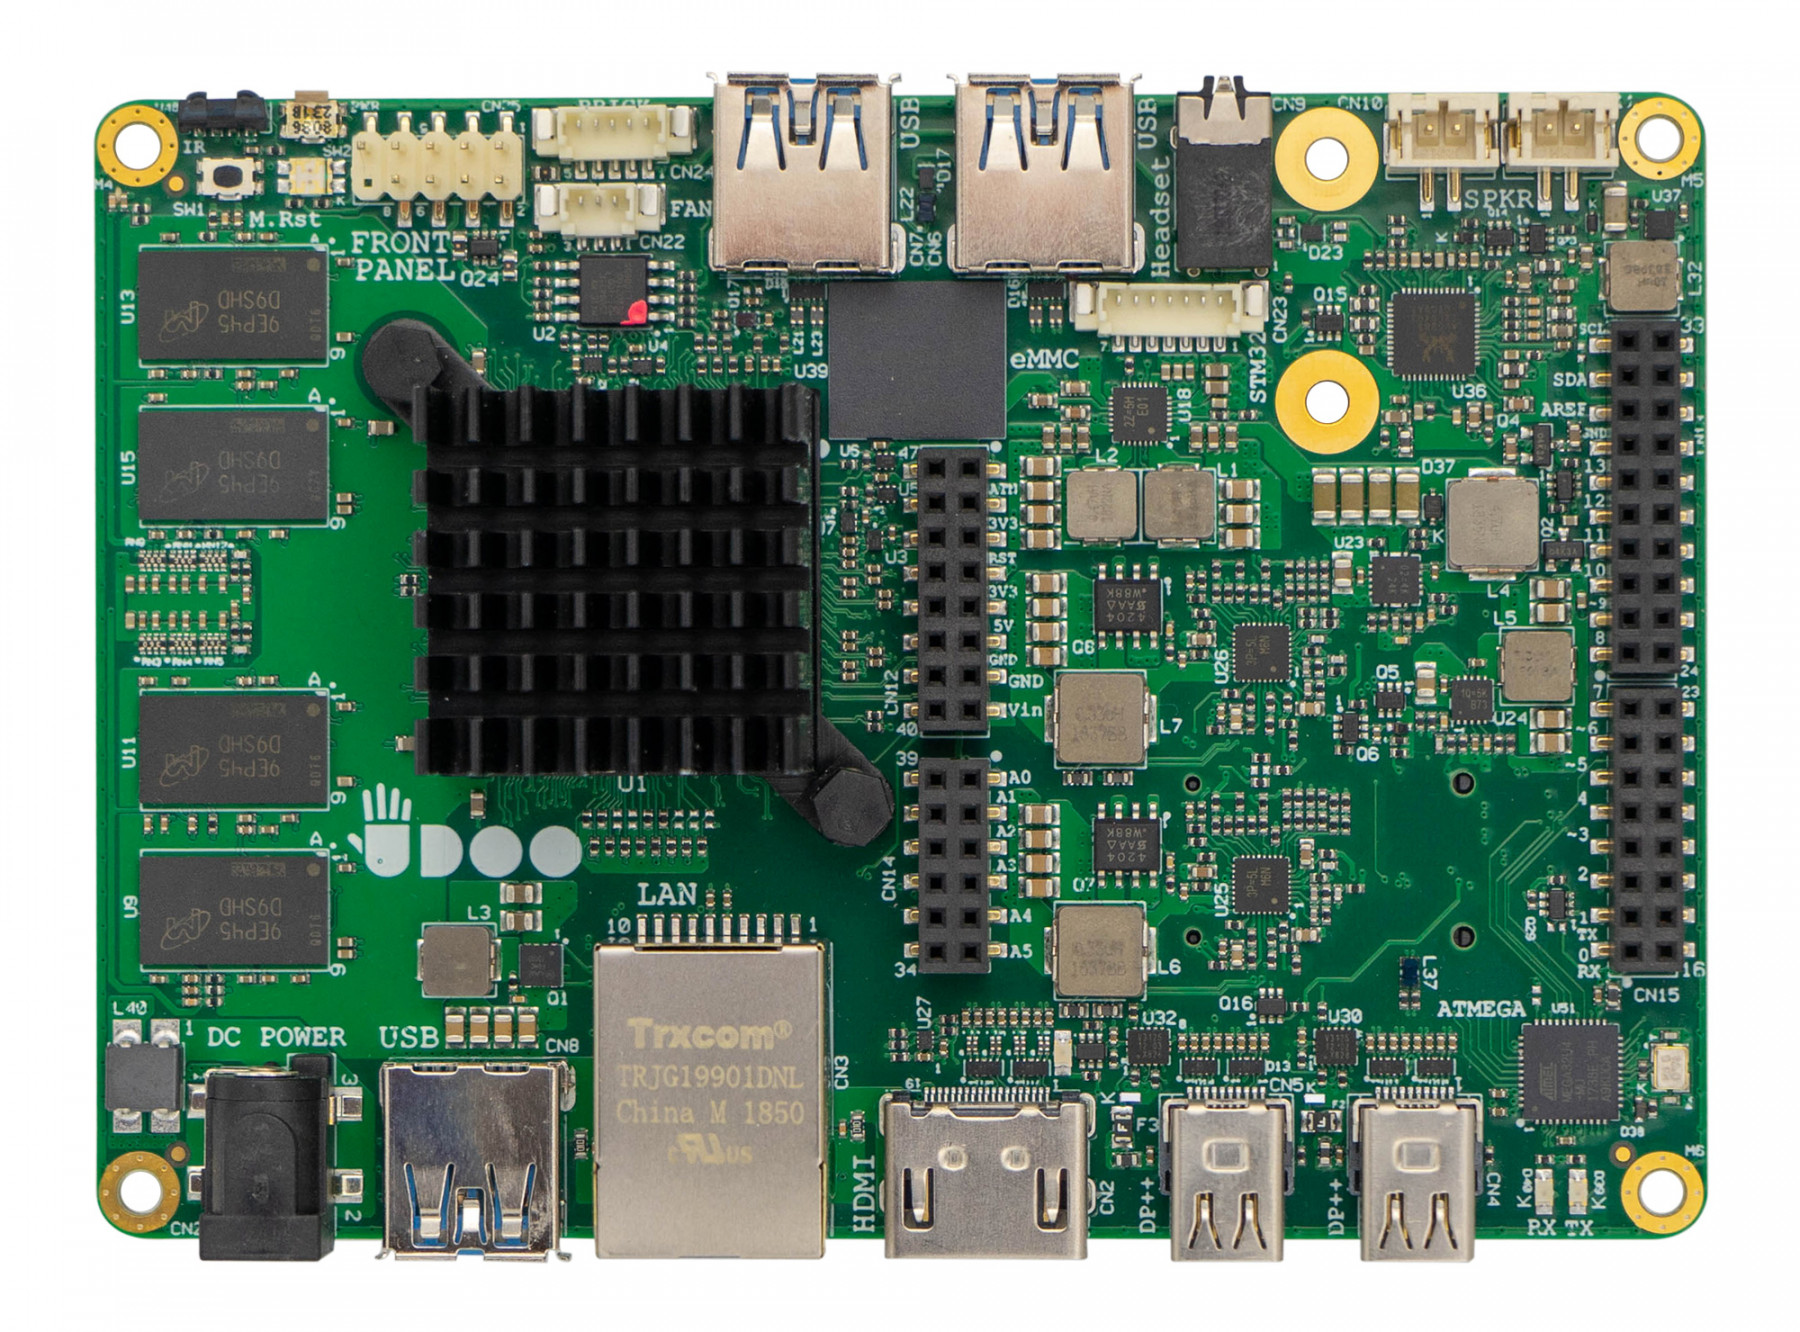 Image of the UDOO x86 Advanced Plus board